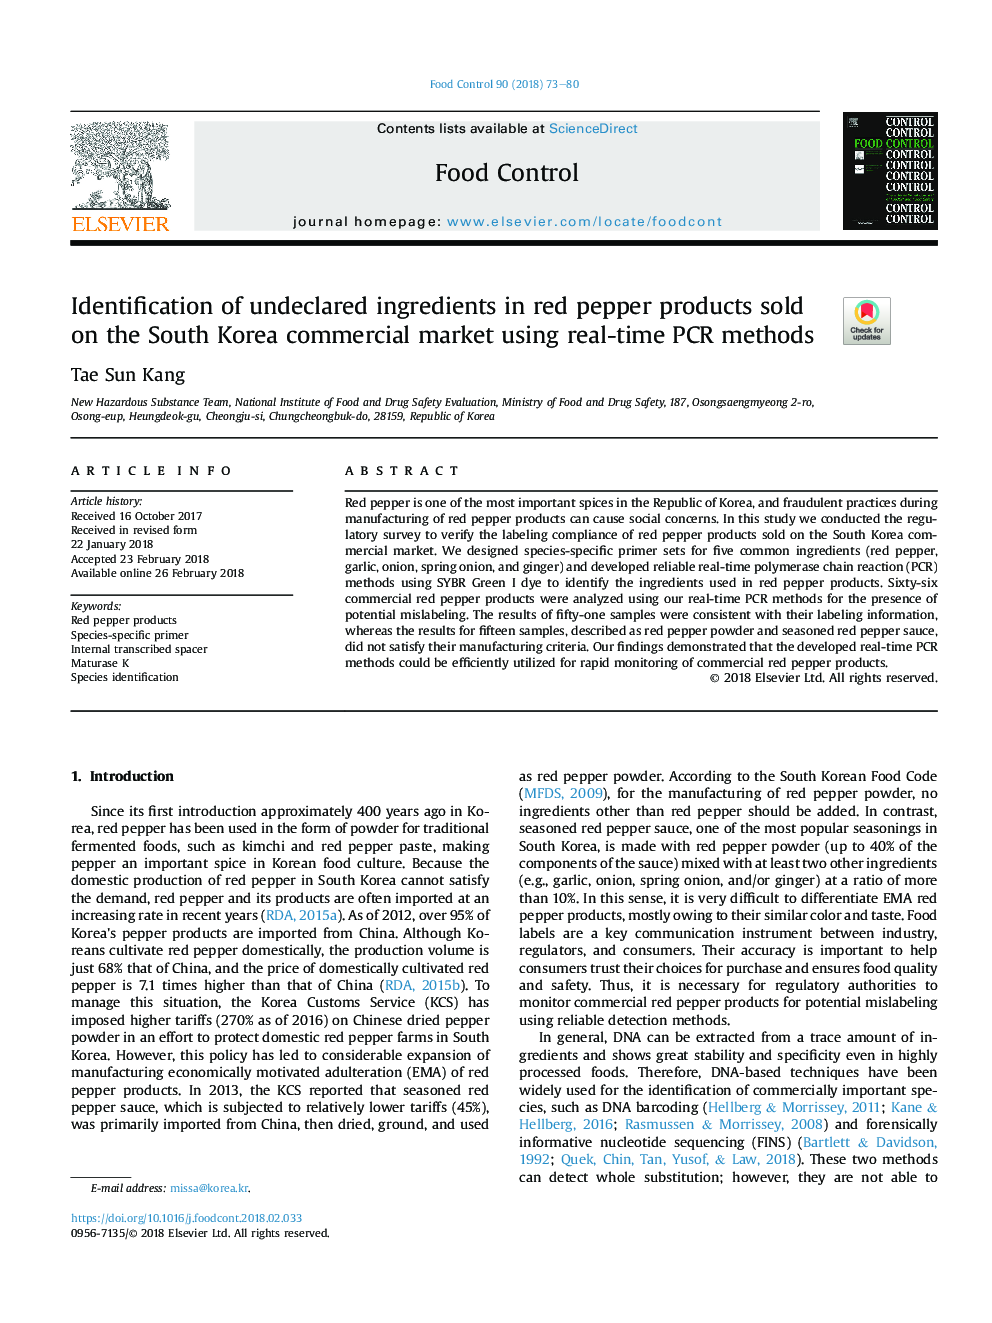 Identification of undeclared ingredients in red pepper products sold on the South Korea commercial market using real-time PCR methods